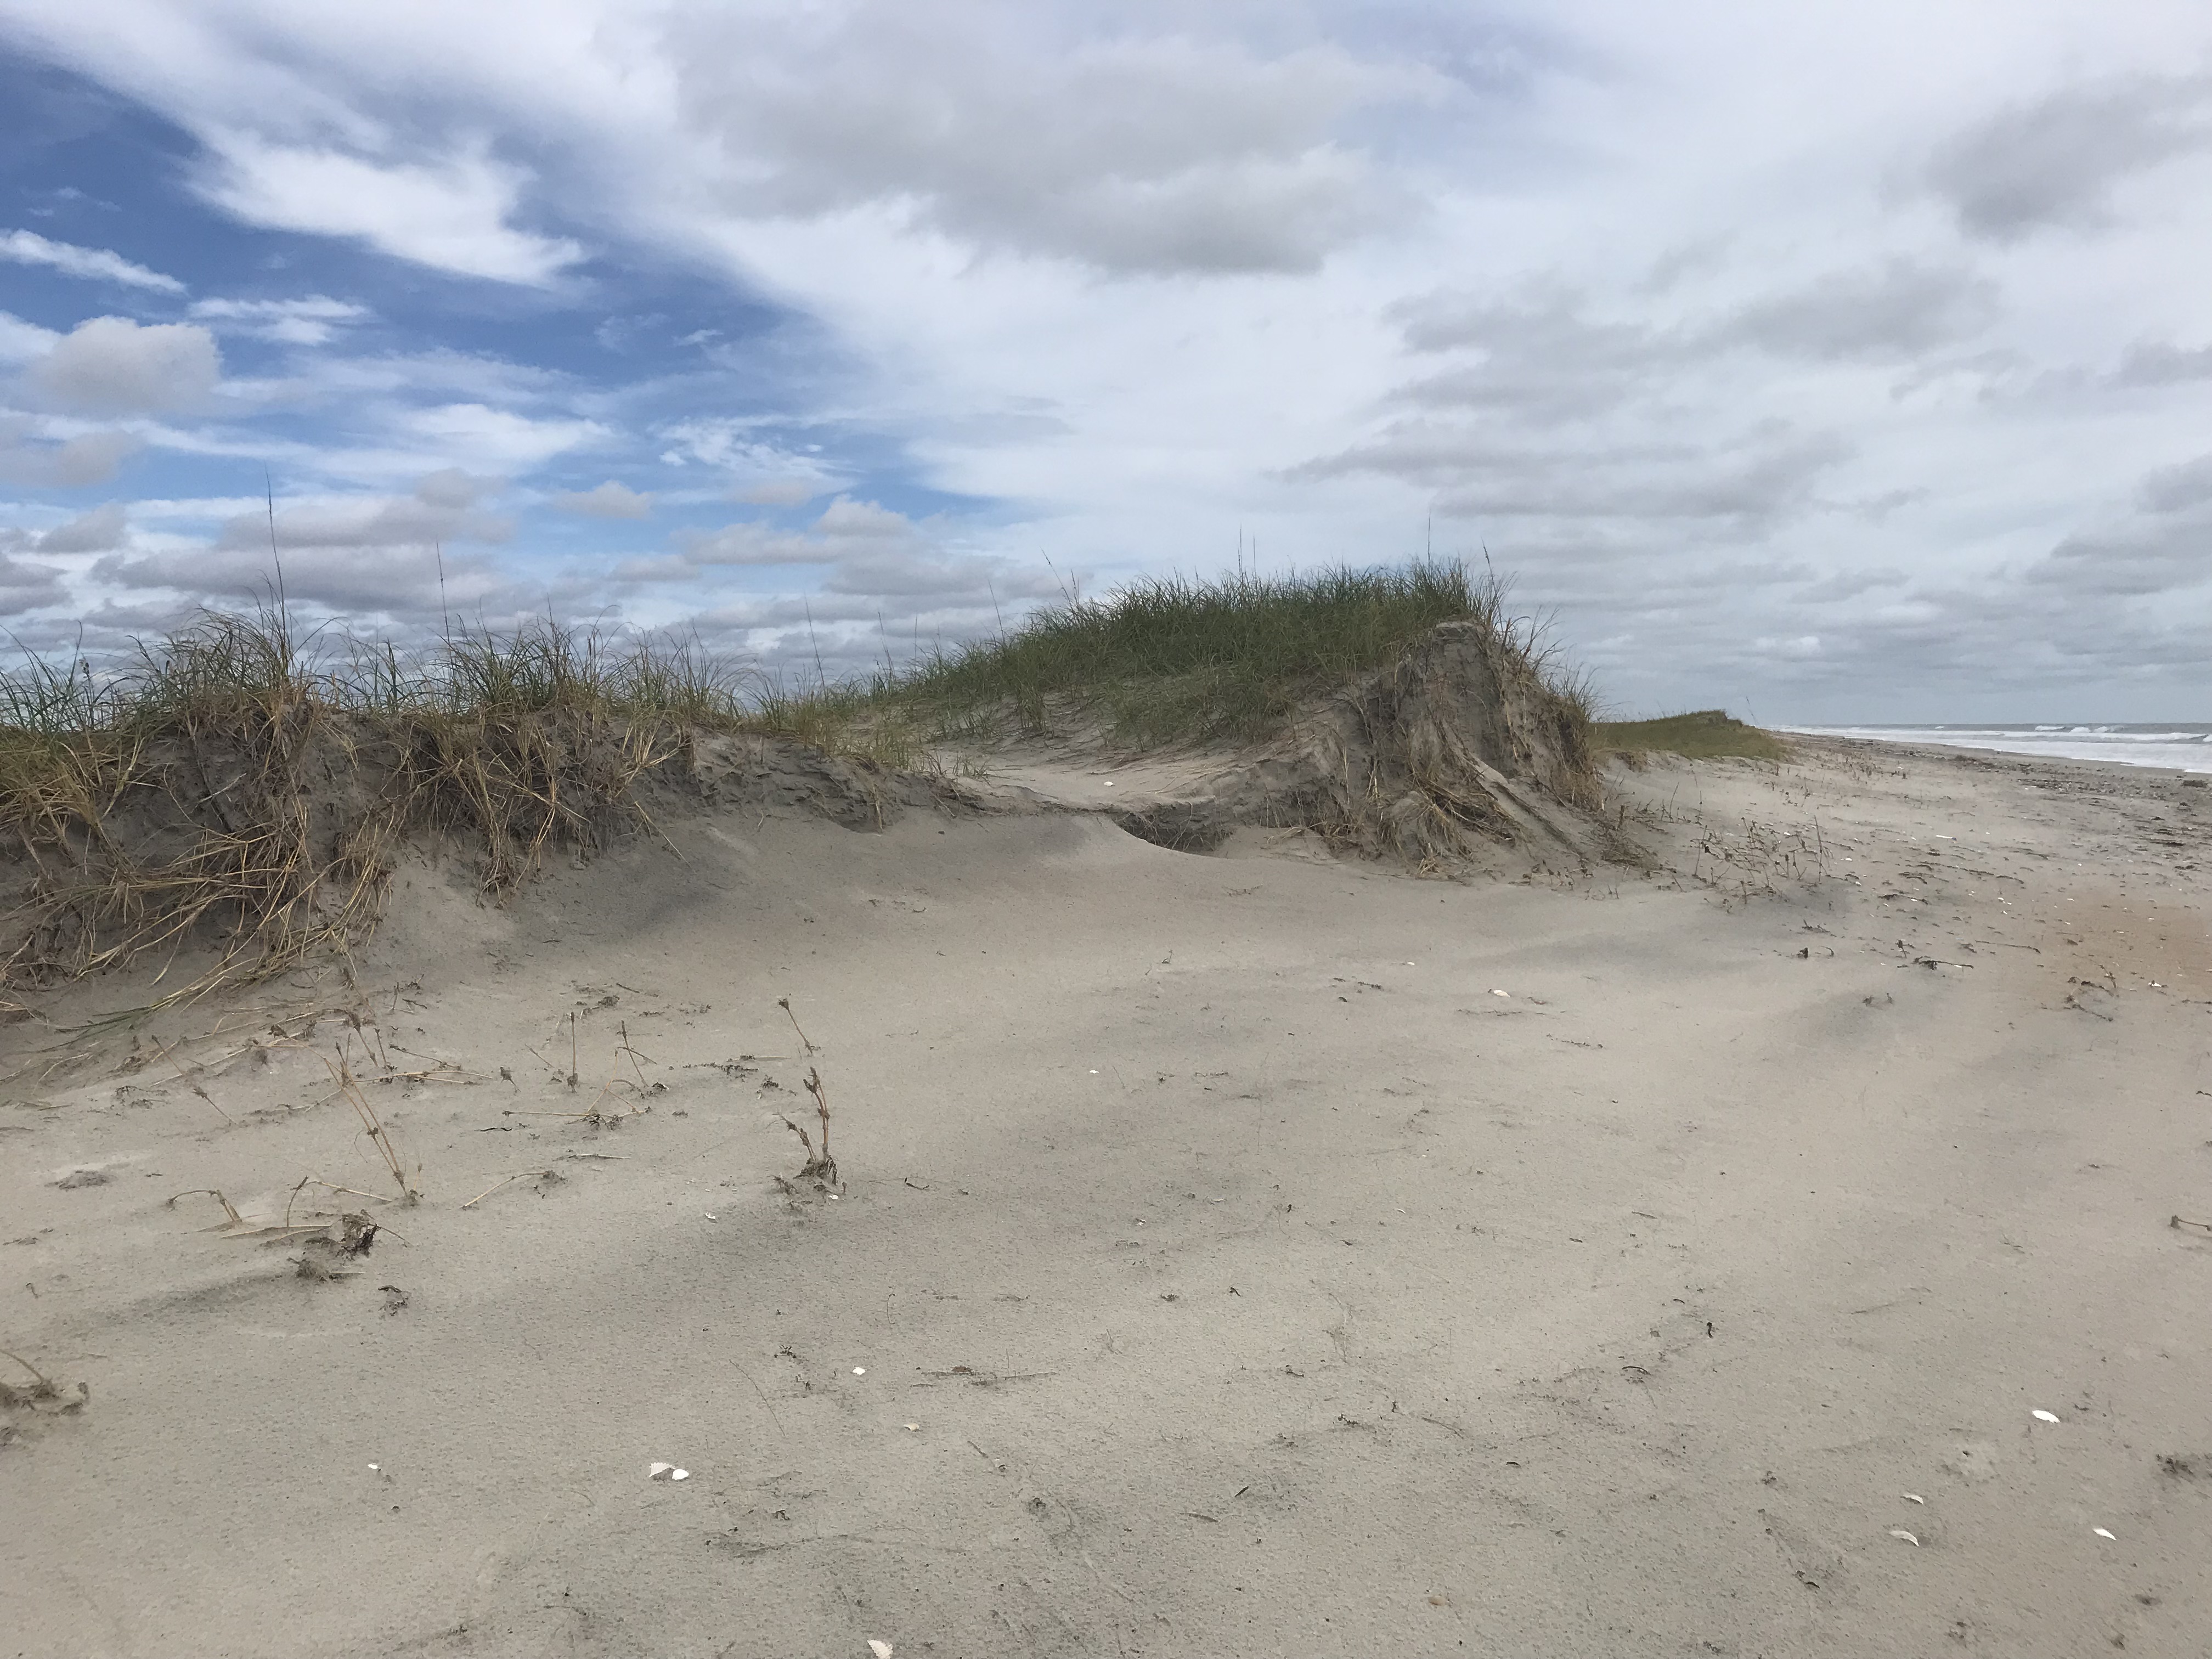 A small sand dune covered with beach grasses accumulates sand at its base on the edge of a smooth sandy beach.